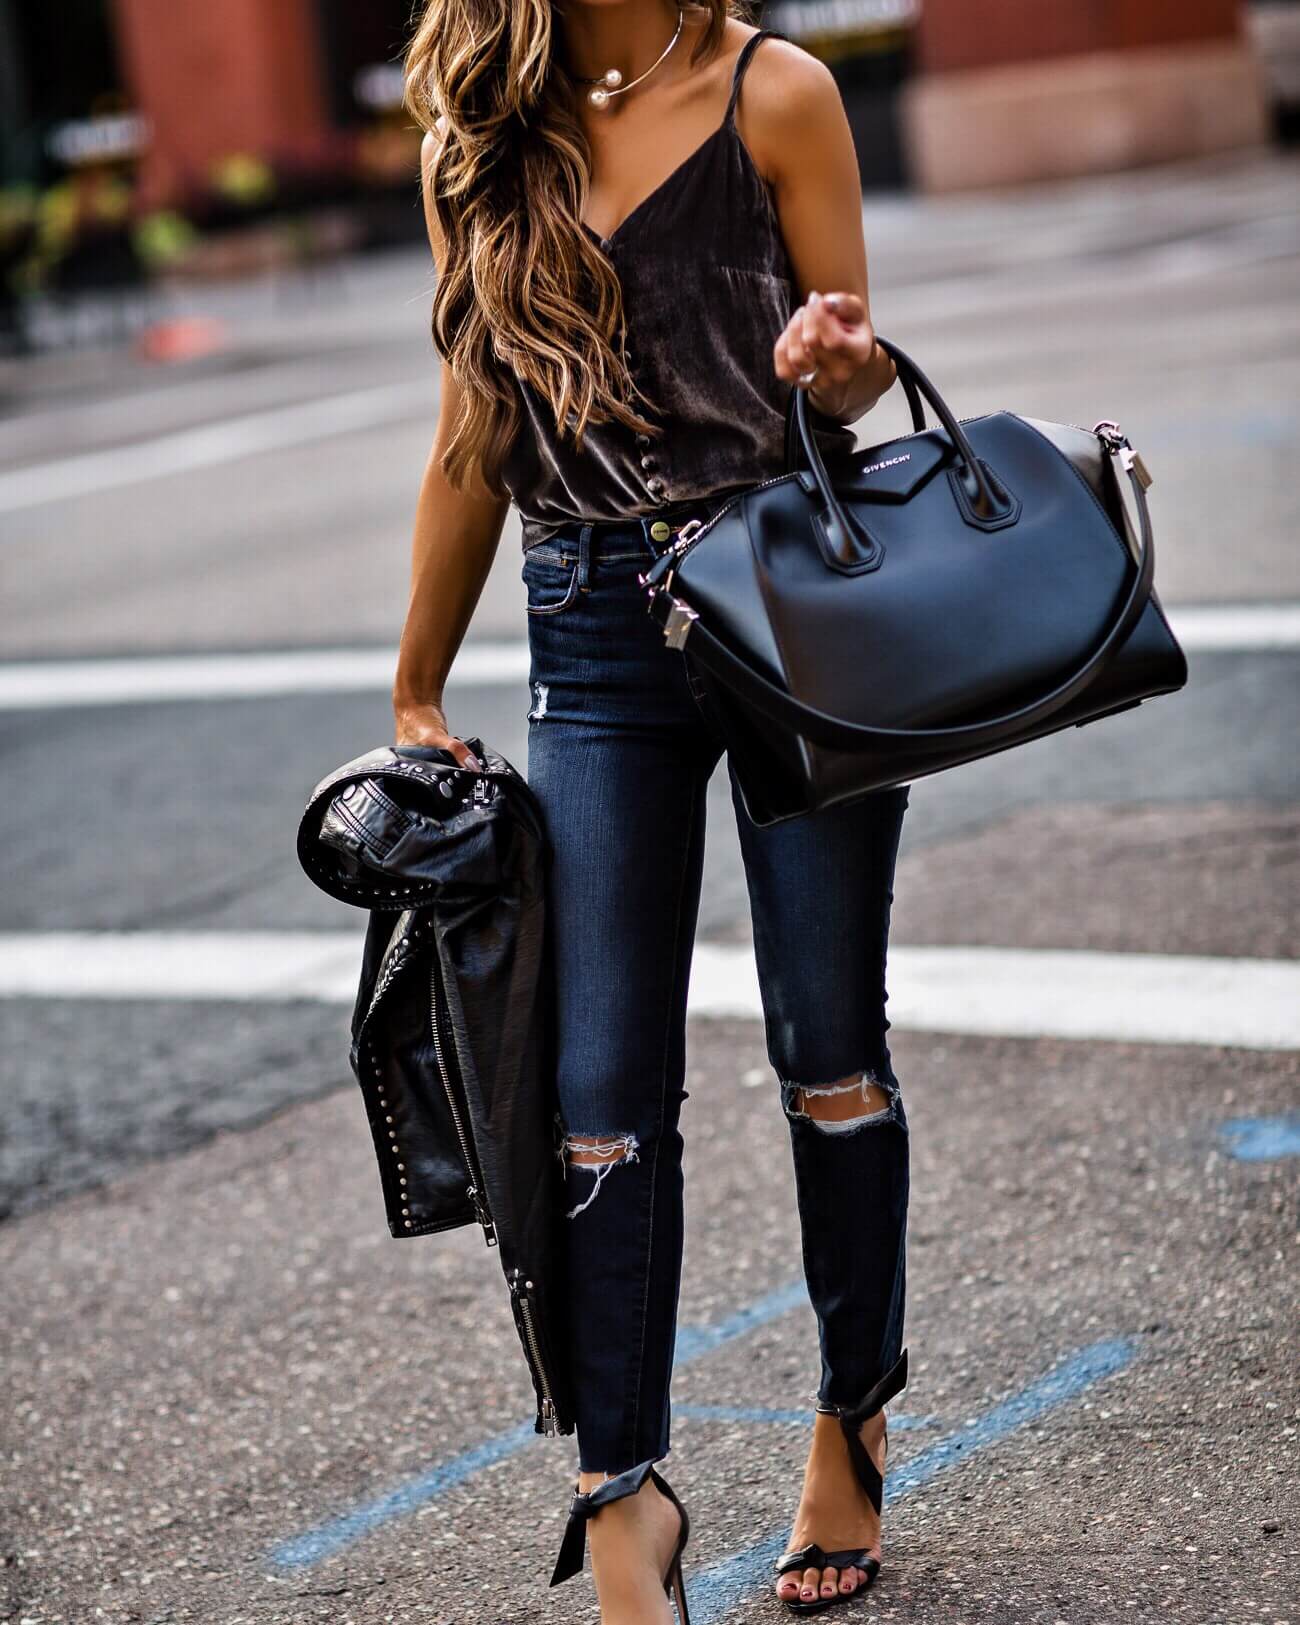 mia mia mine wearing a velvet cami and leather givenchy bag